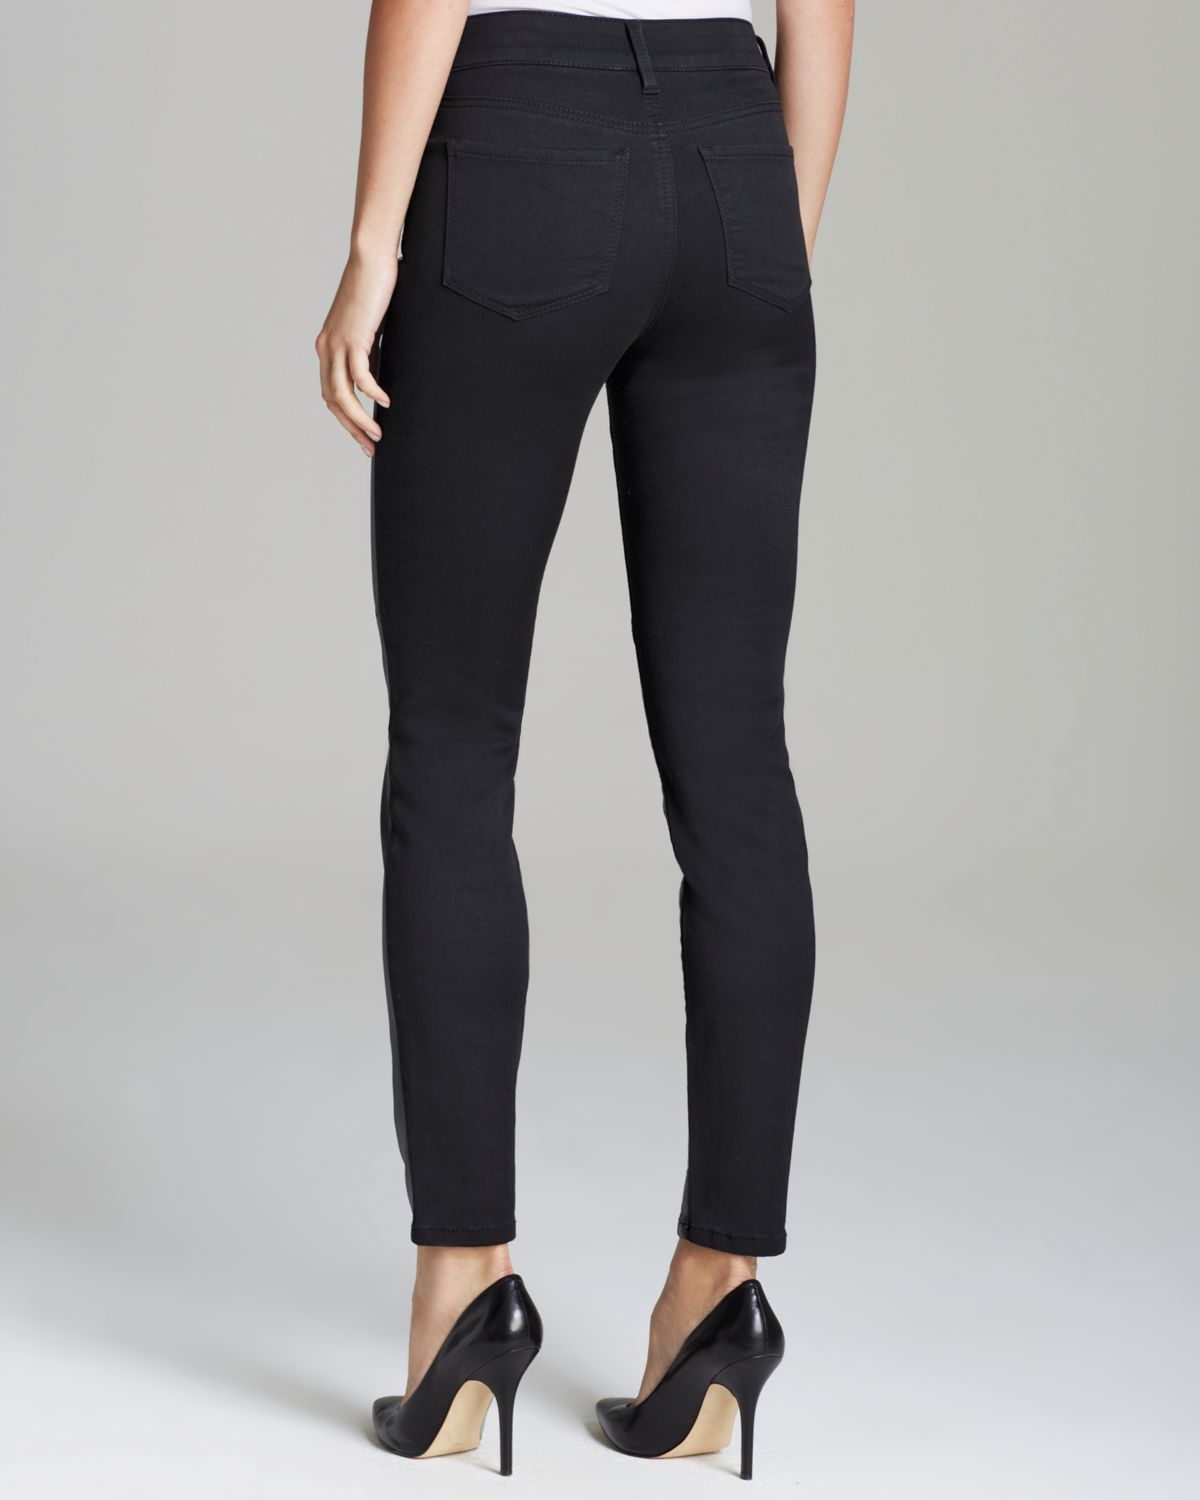 NYDJ Alina Leggings With Faux-Leather Front in Black - Lyst